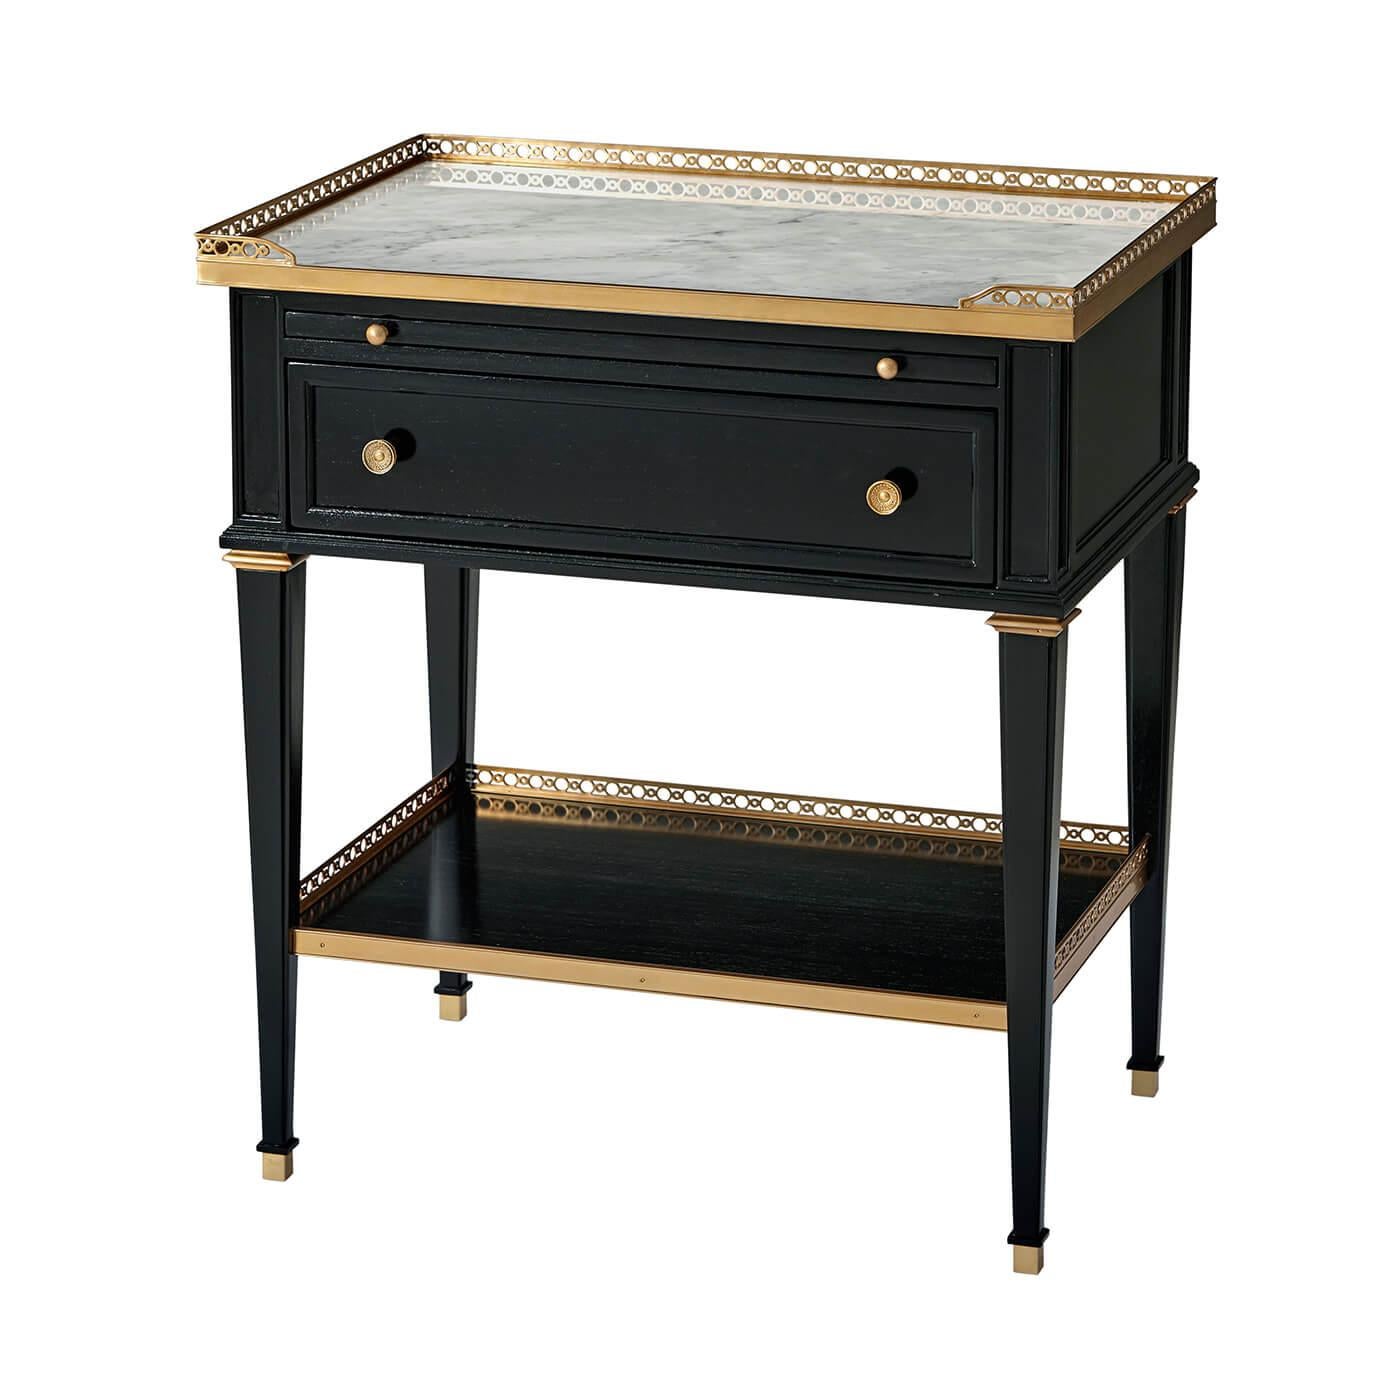 A French Louis XVI style neoclassical nightstand, with a pierced brass gallery and Bianco Carrara marble top, pull-out tray, single drawer with cast brass handles, square tapered legs with brass capitals and feet, and pierced brass gallery lower